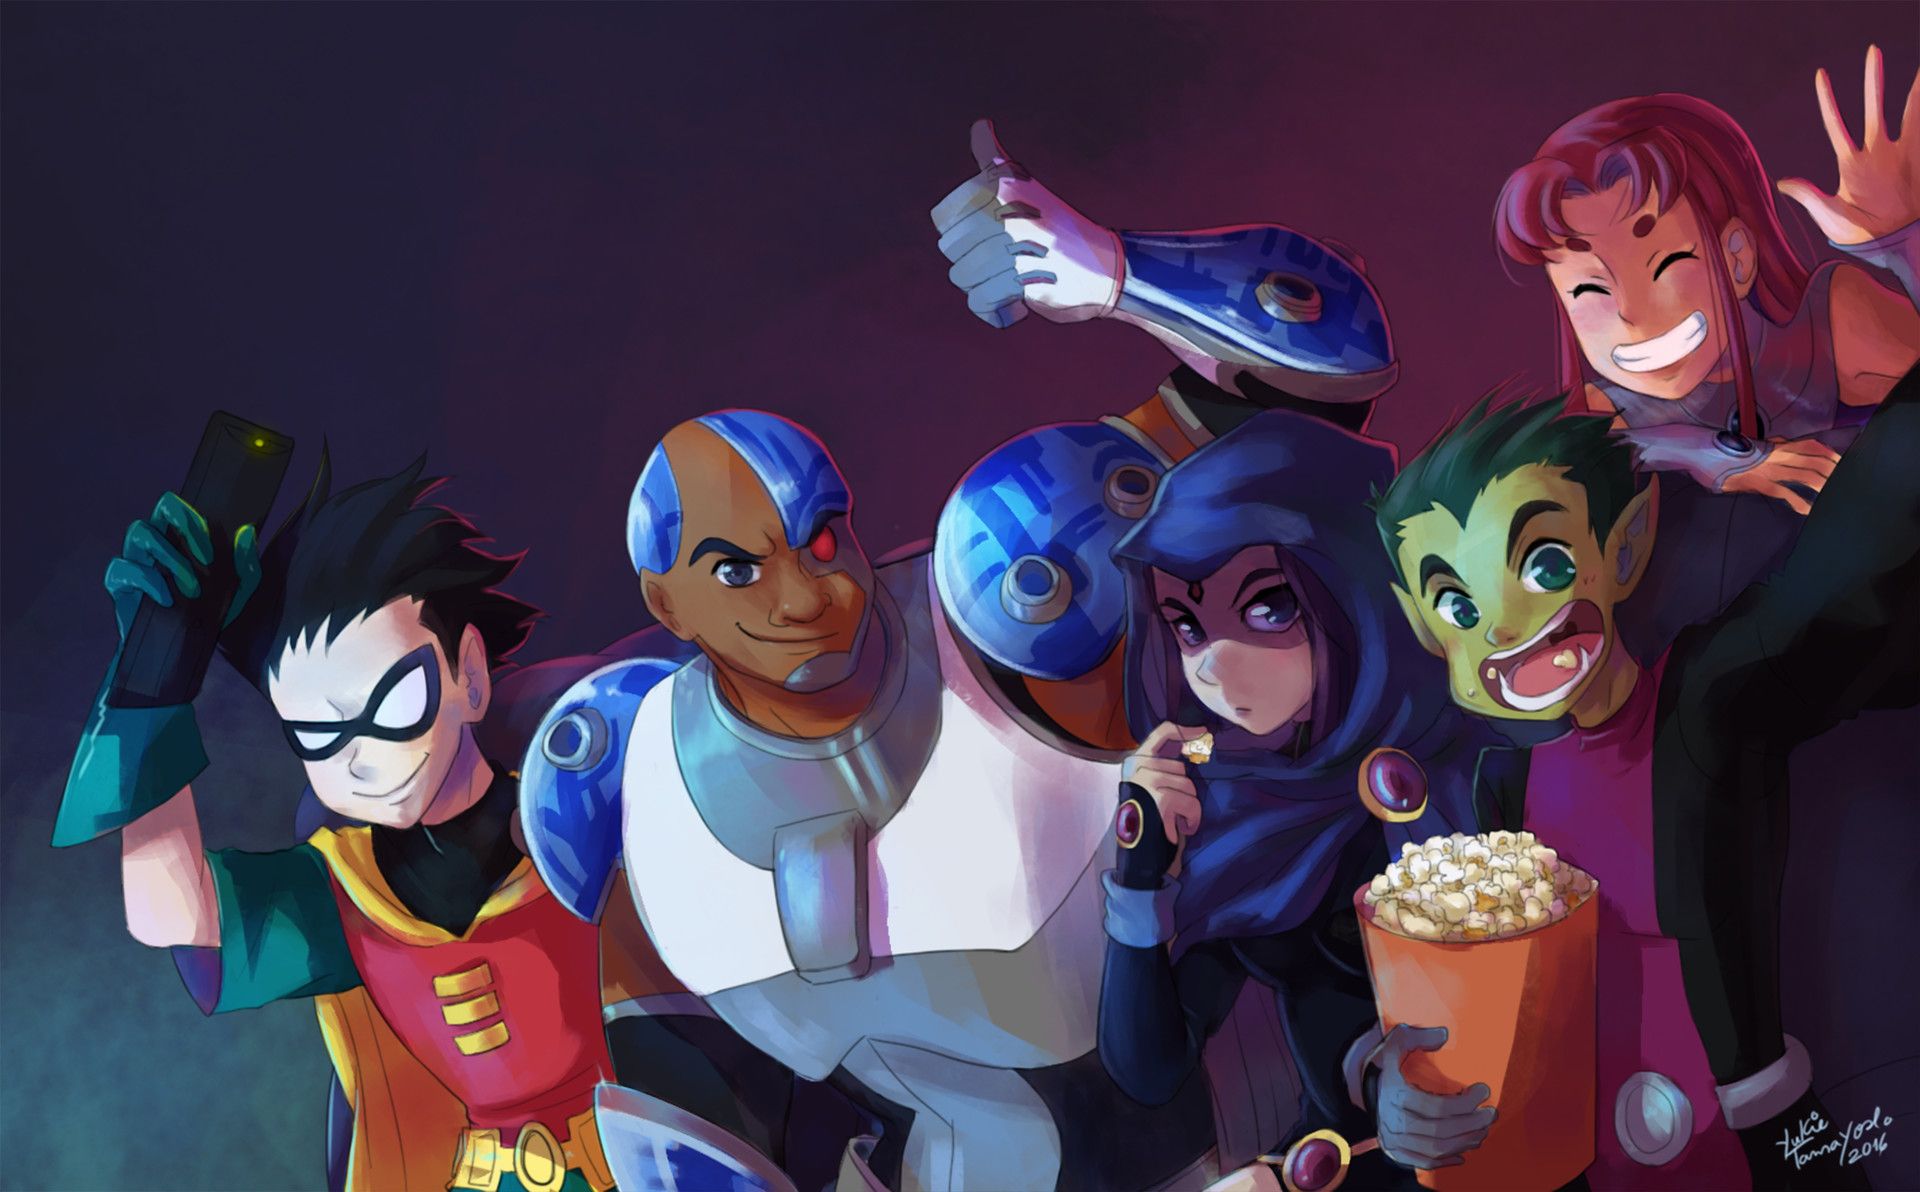 30 Super Cool (And Awesome) Facts You Didn’t Know About Teen Titans